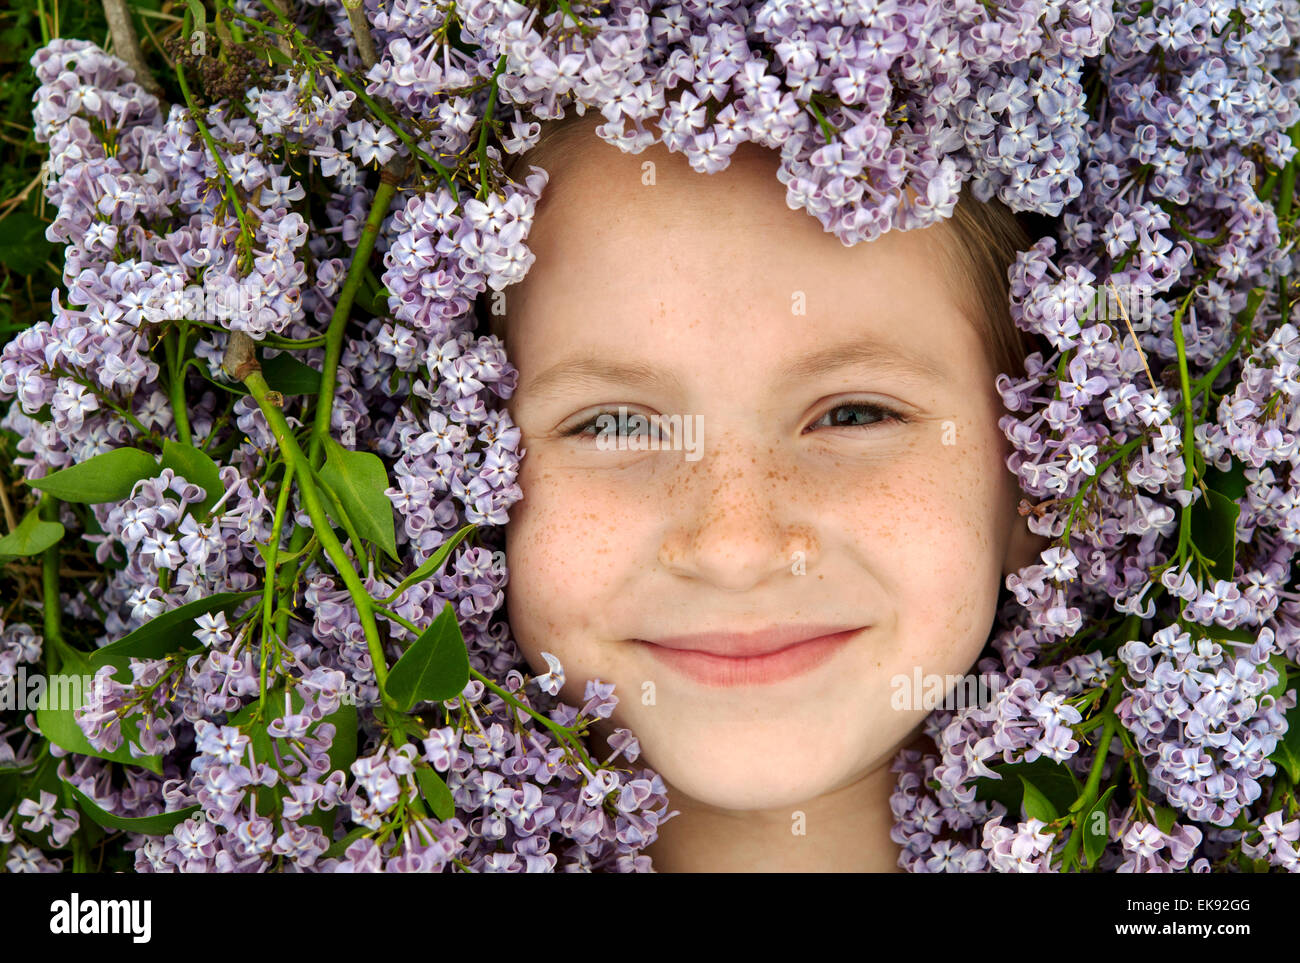 Pretty girl face surrounded by Lilac flowers Stock Photo